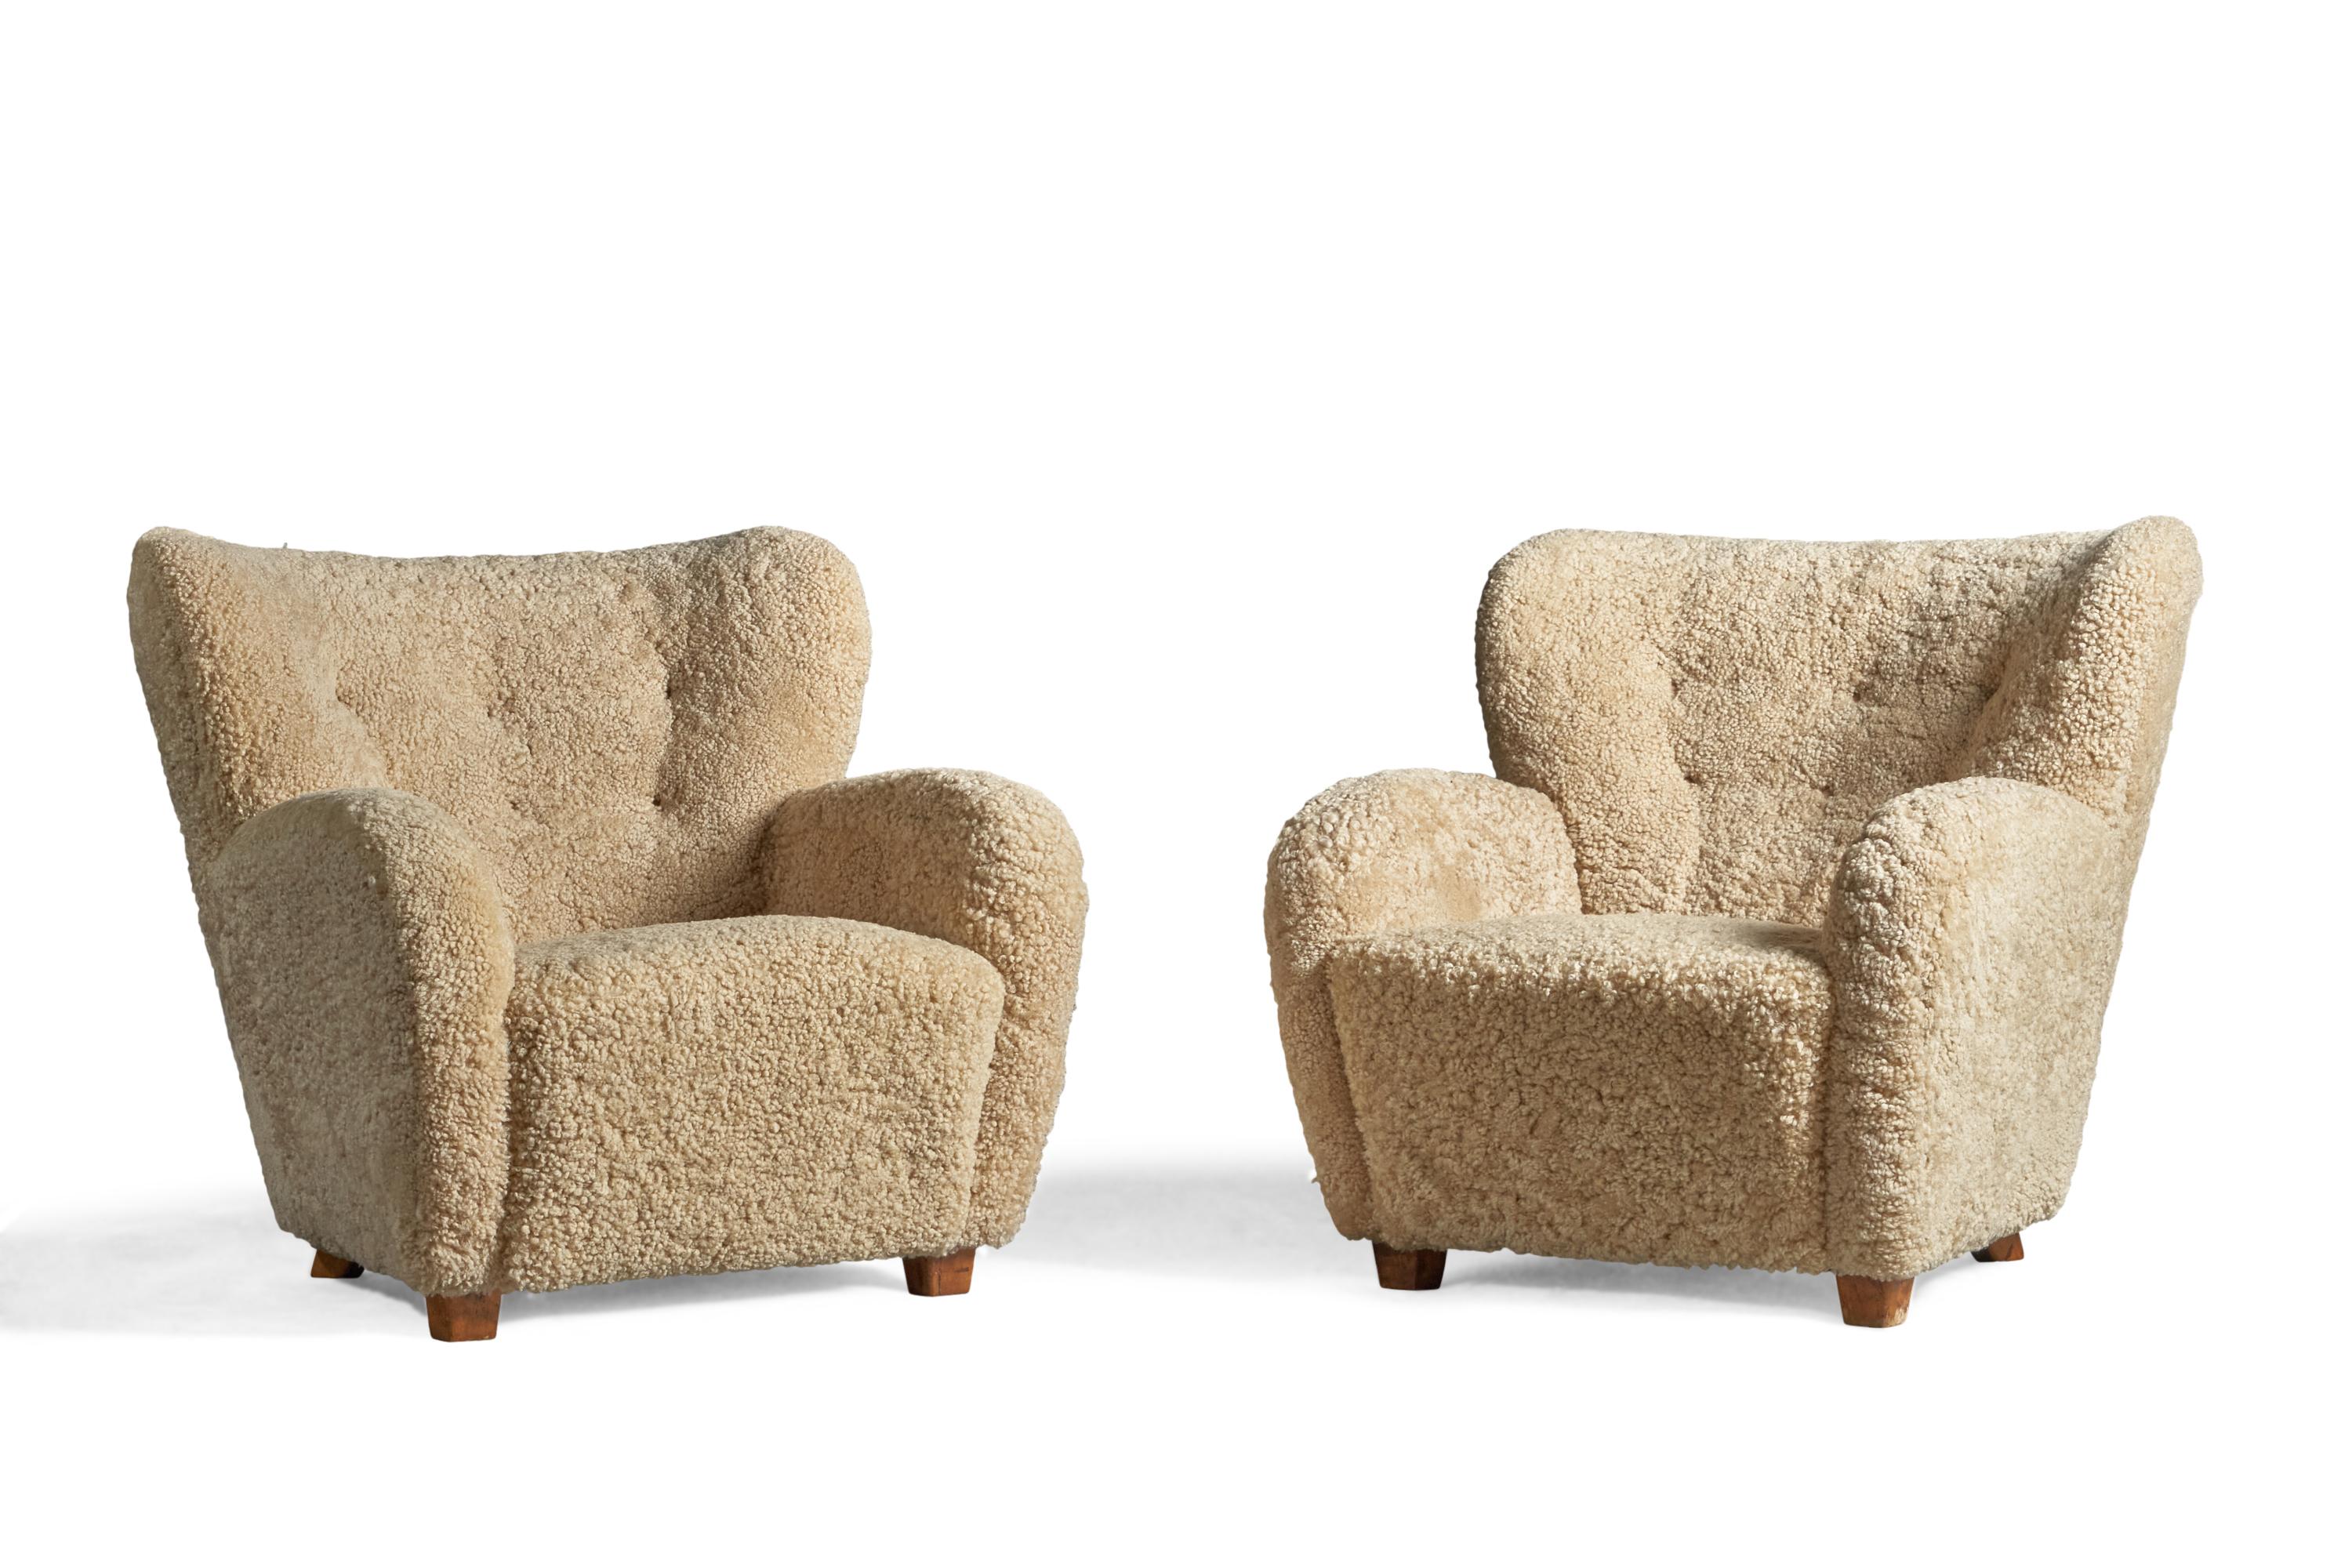 A pair of shearling and birch lounge chairs, designed and produced in Finland, 1940s.

15